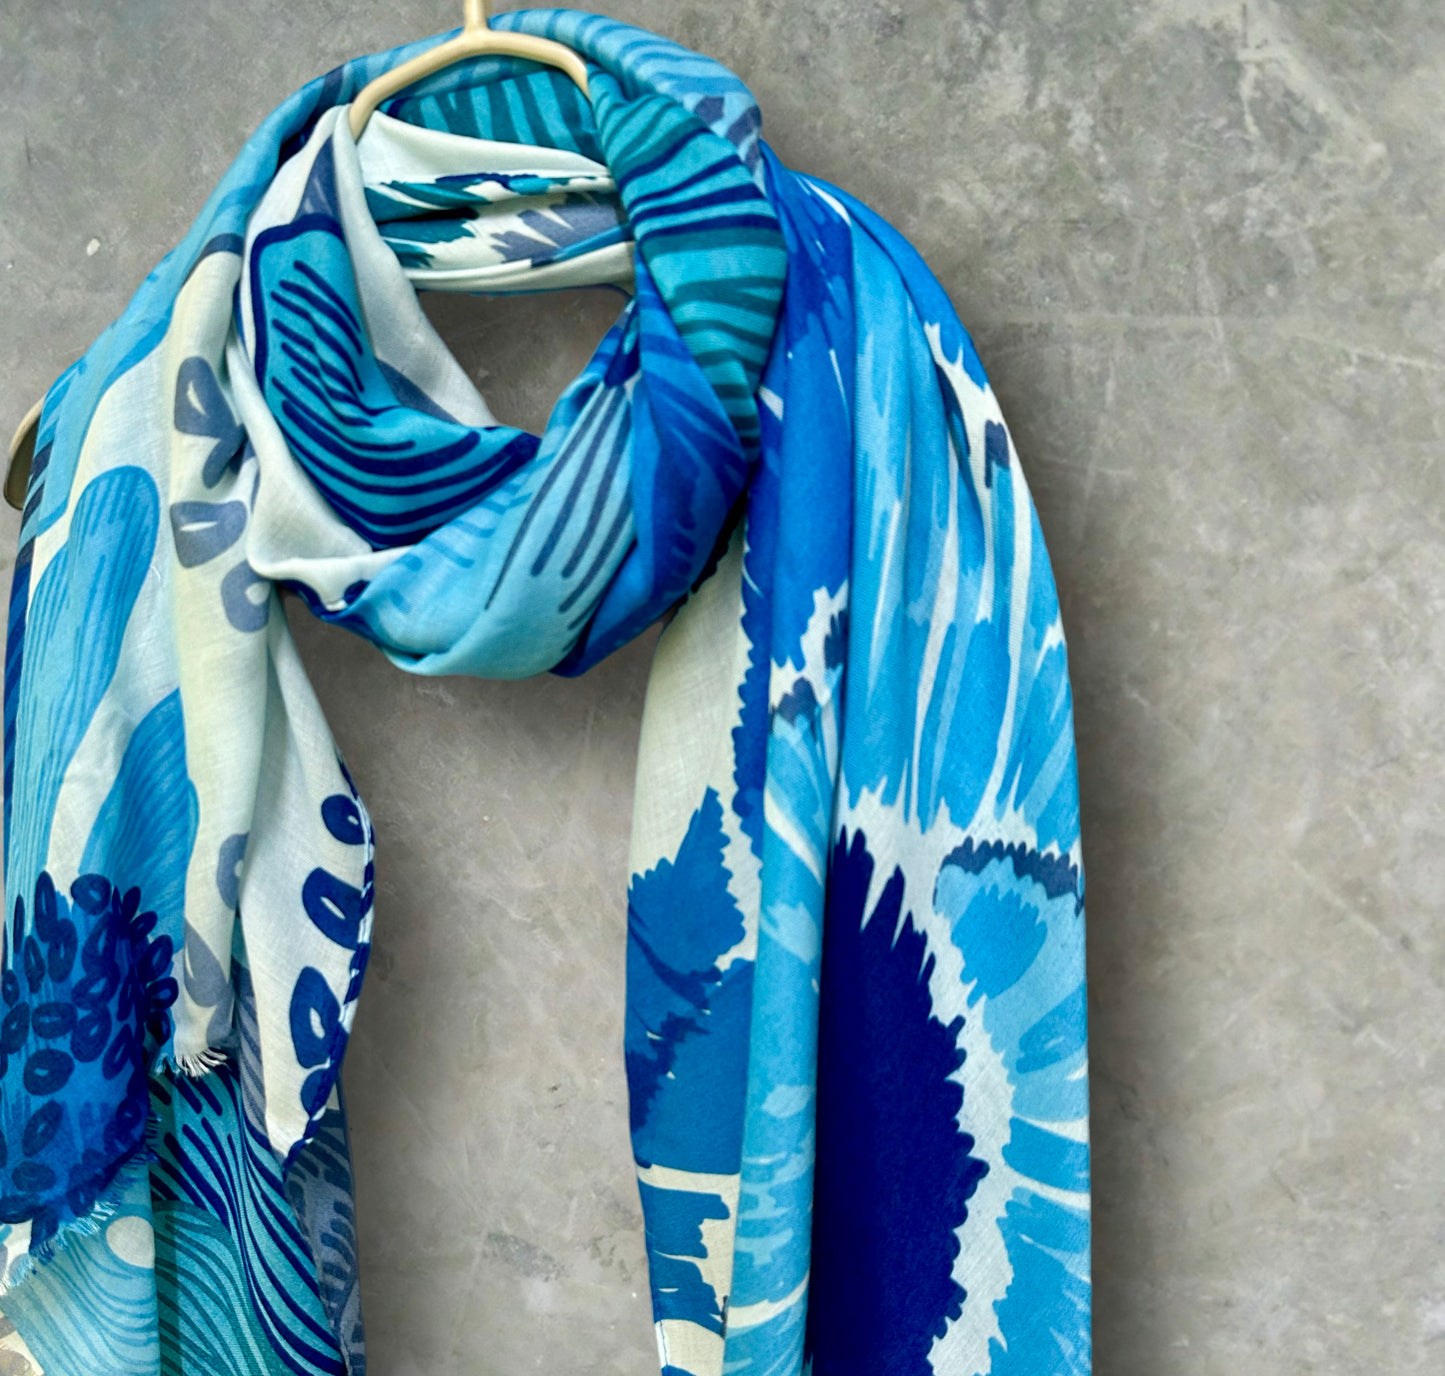 Stunning Blue Scarf Featuring Huge Sketched Flowers for Women,Great for All Seasons,Perfect Gifts for Her,Mother,Birthday and Christmas